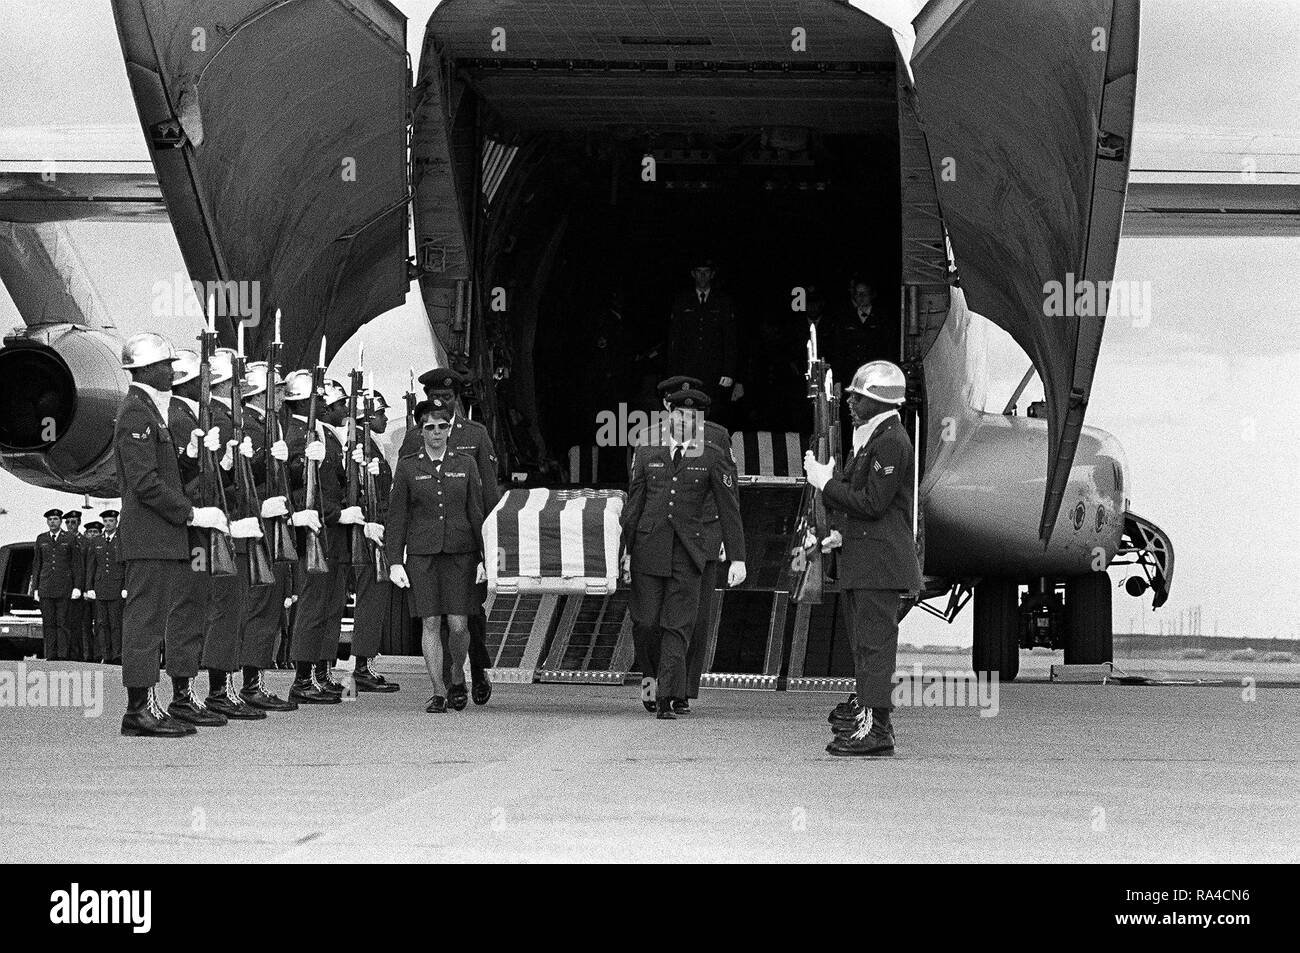 1977 - An Air Force honor guard stands at attention while the casket of an MIA from North Vietnam is removed from a C-141 Starlifter aircraft. Stock Photo